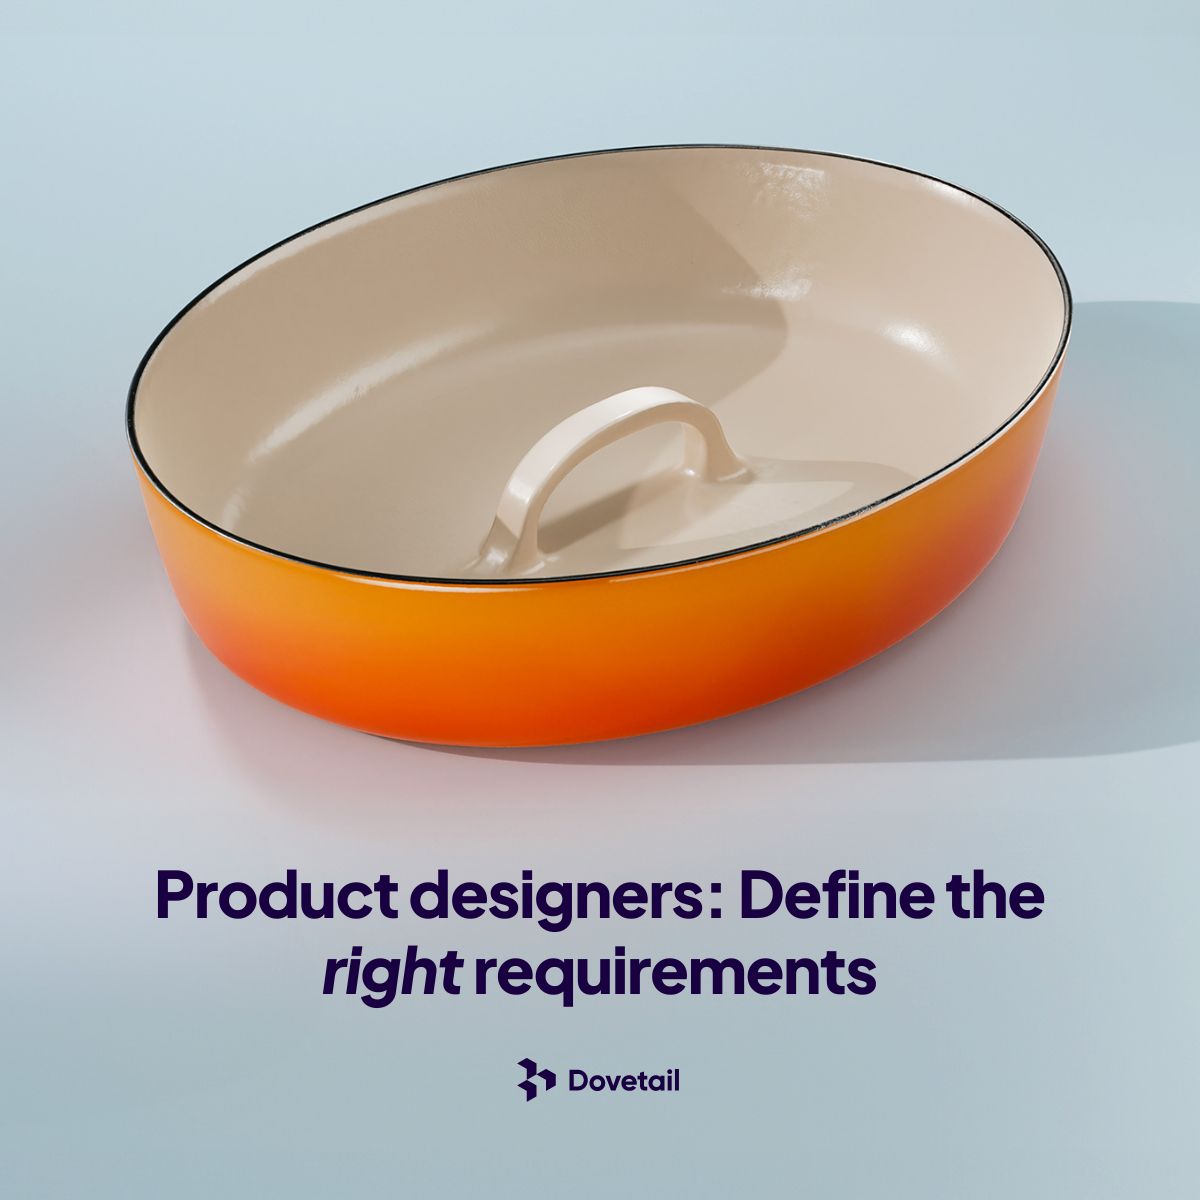 Dovetail on LinkedIn: Customer Research Software for Product Designers